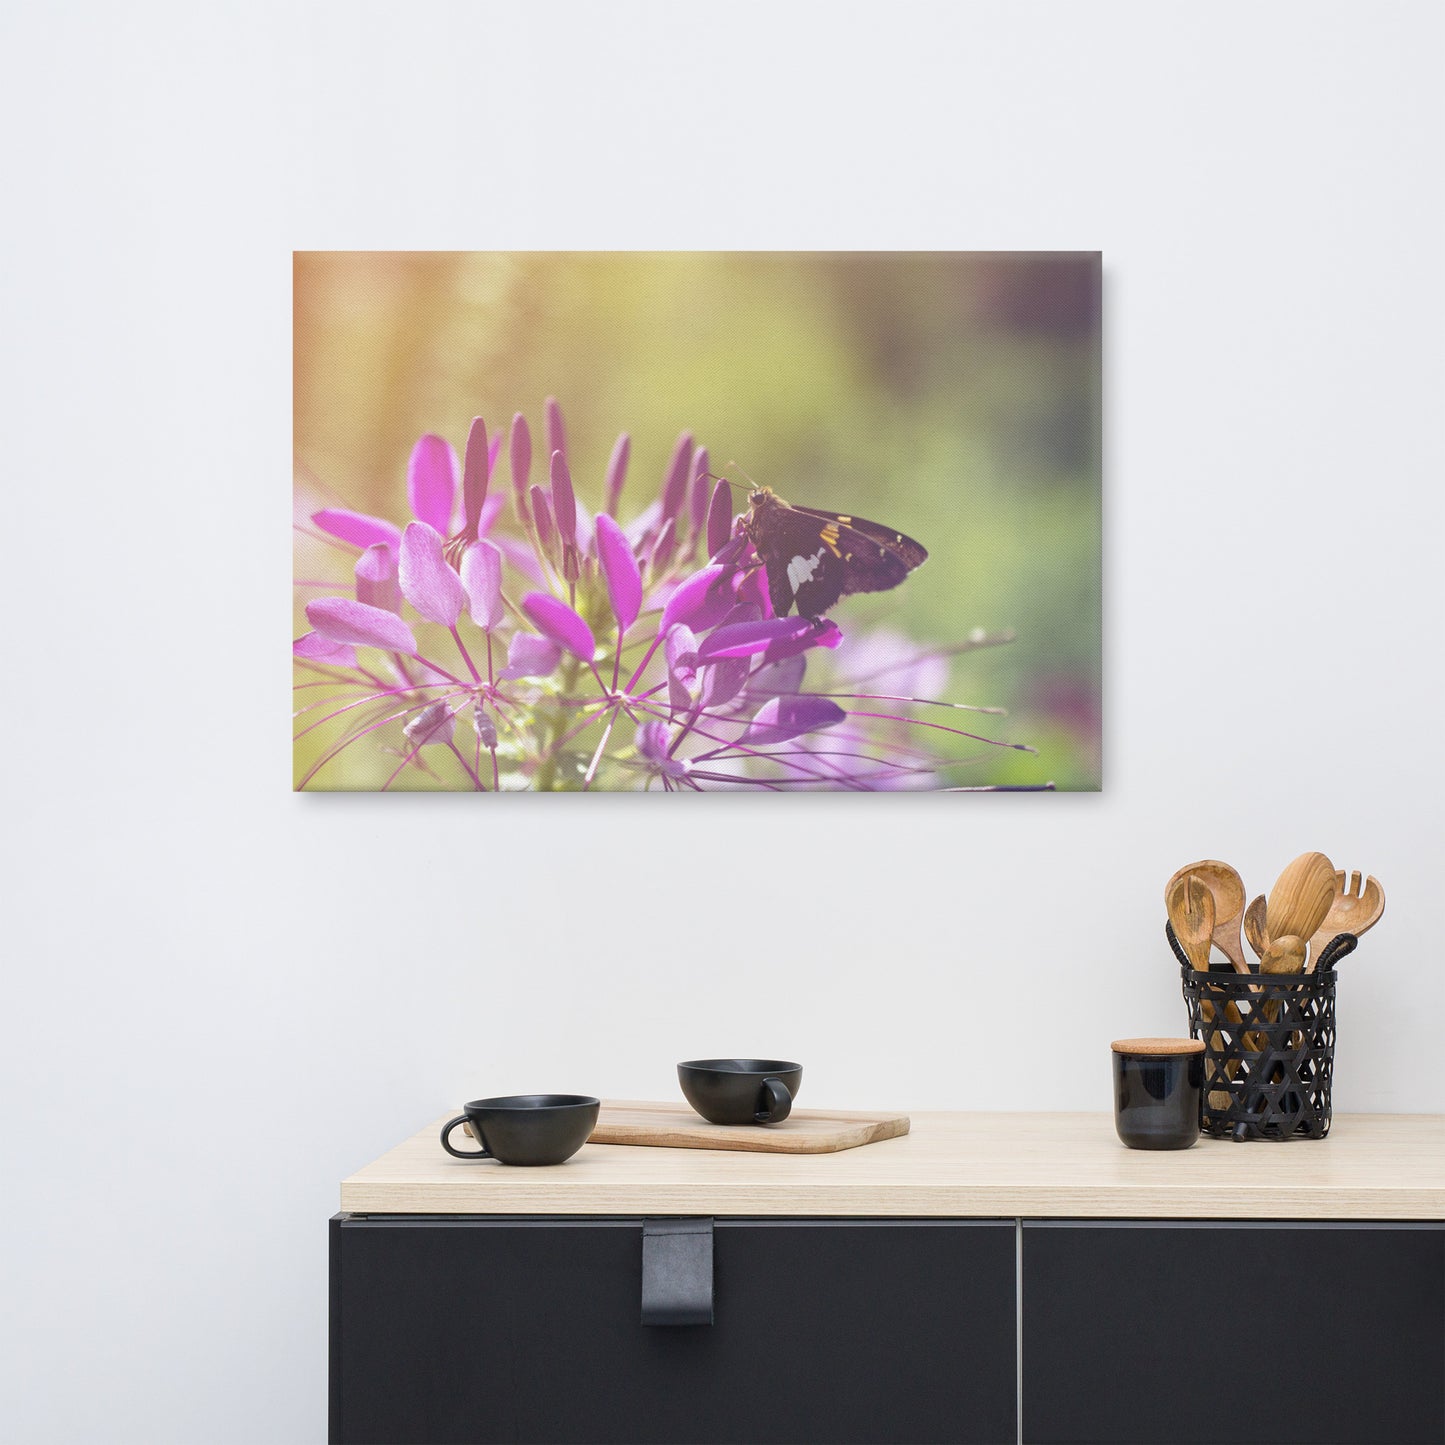 Spider Flower in Glory Light With Spotted Moth Floral Nature Canvas Wall Art Prints